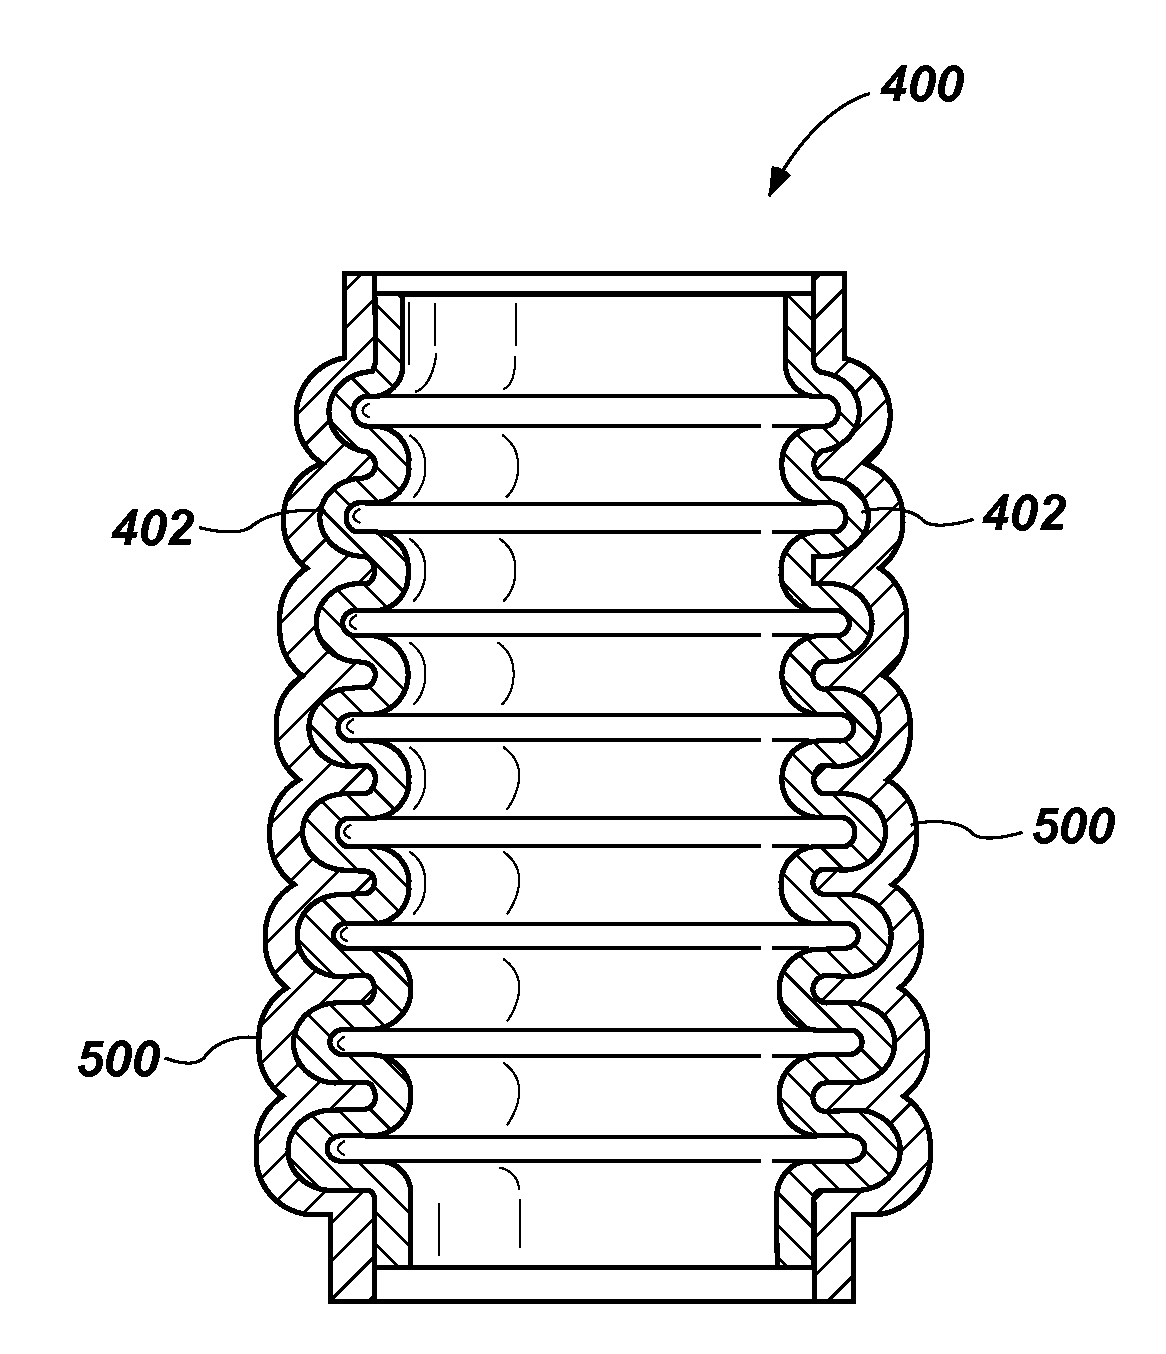 Methods of forming protecting coatings on substrate surfaces and devices including such protective coatings